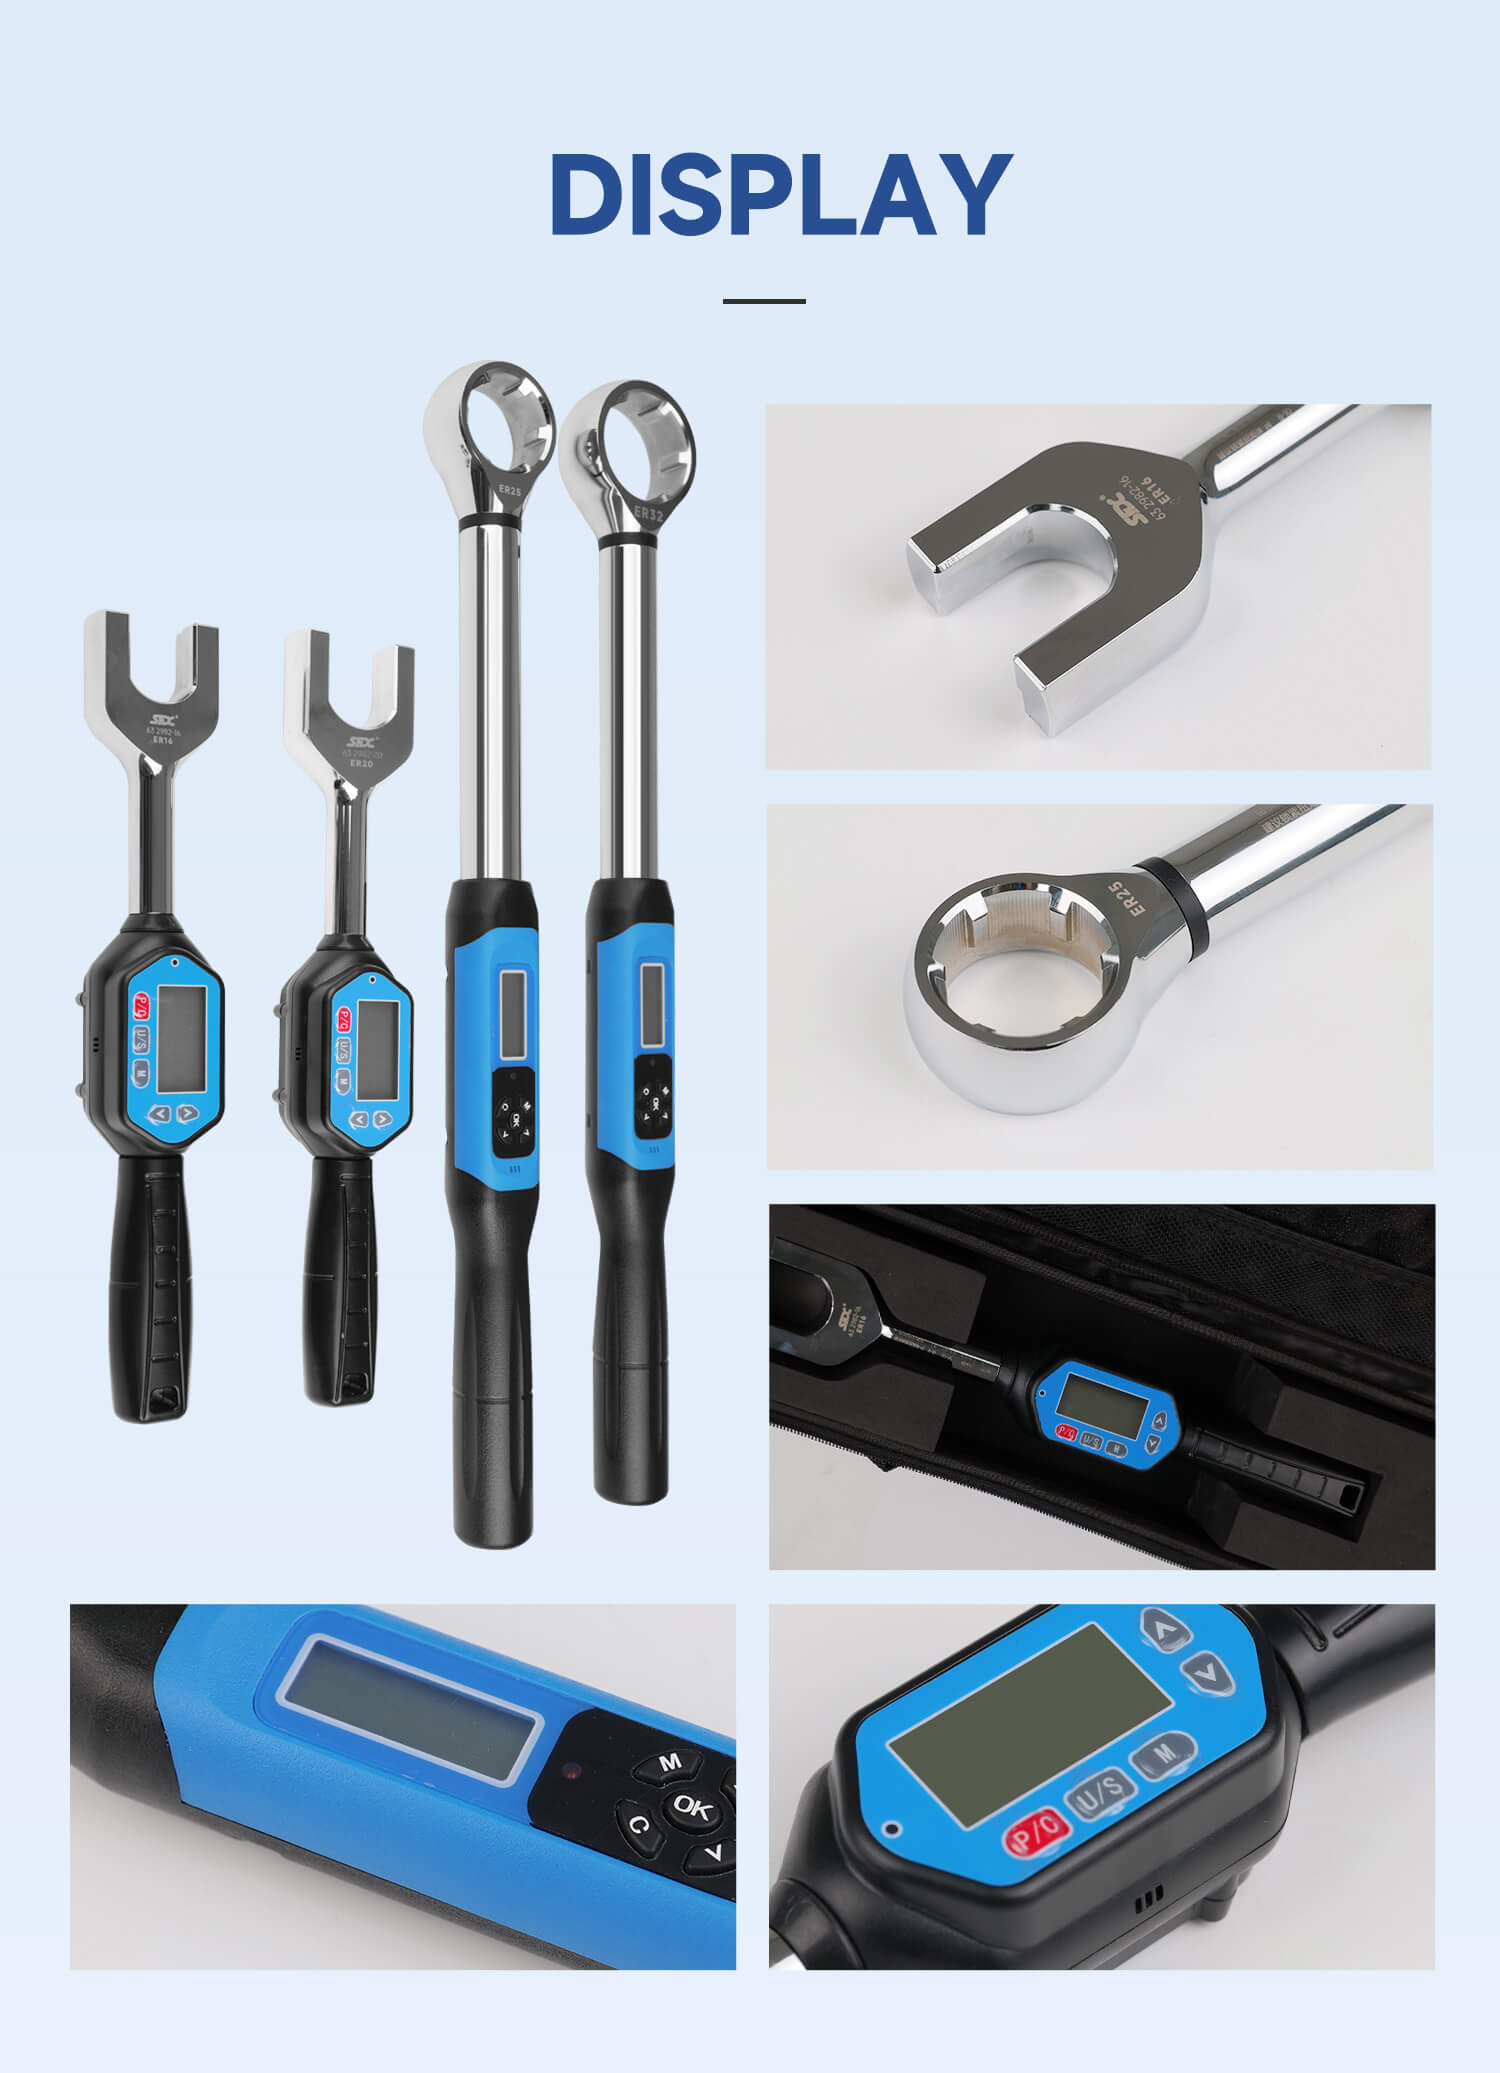 Digital ER Nut Torque Wrenches Used To Tighten And Remove ER16 Nut